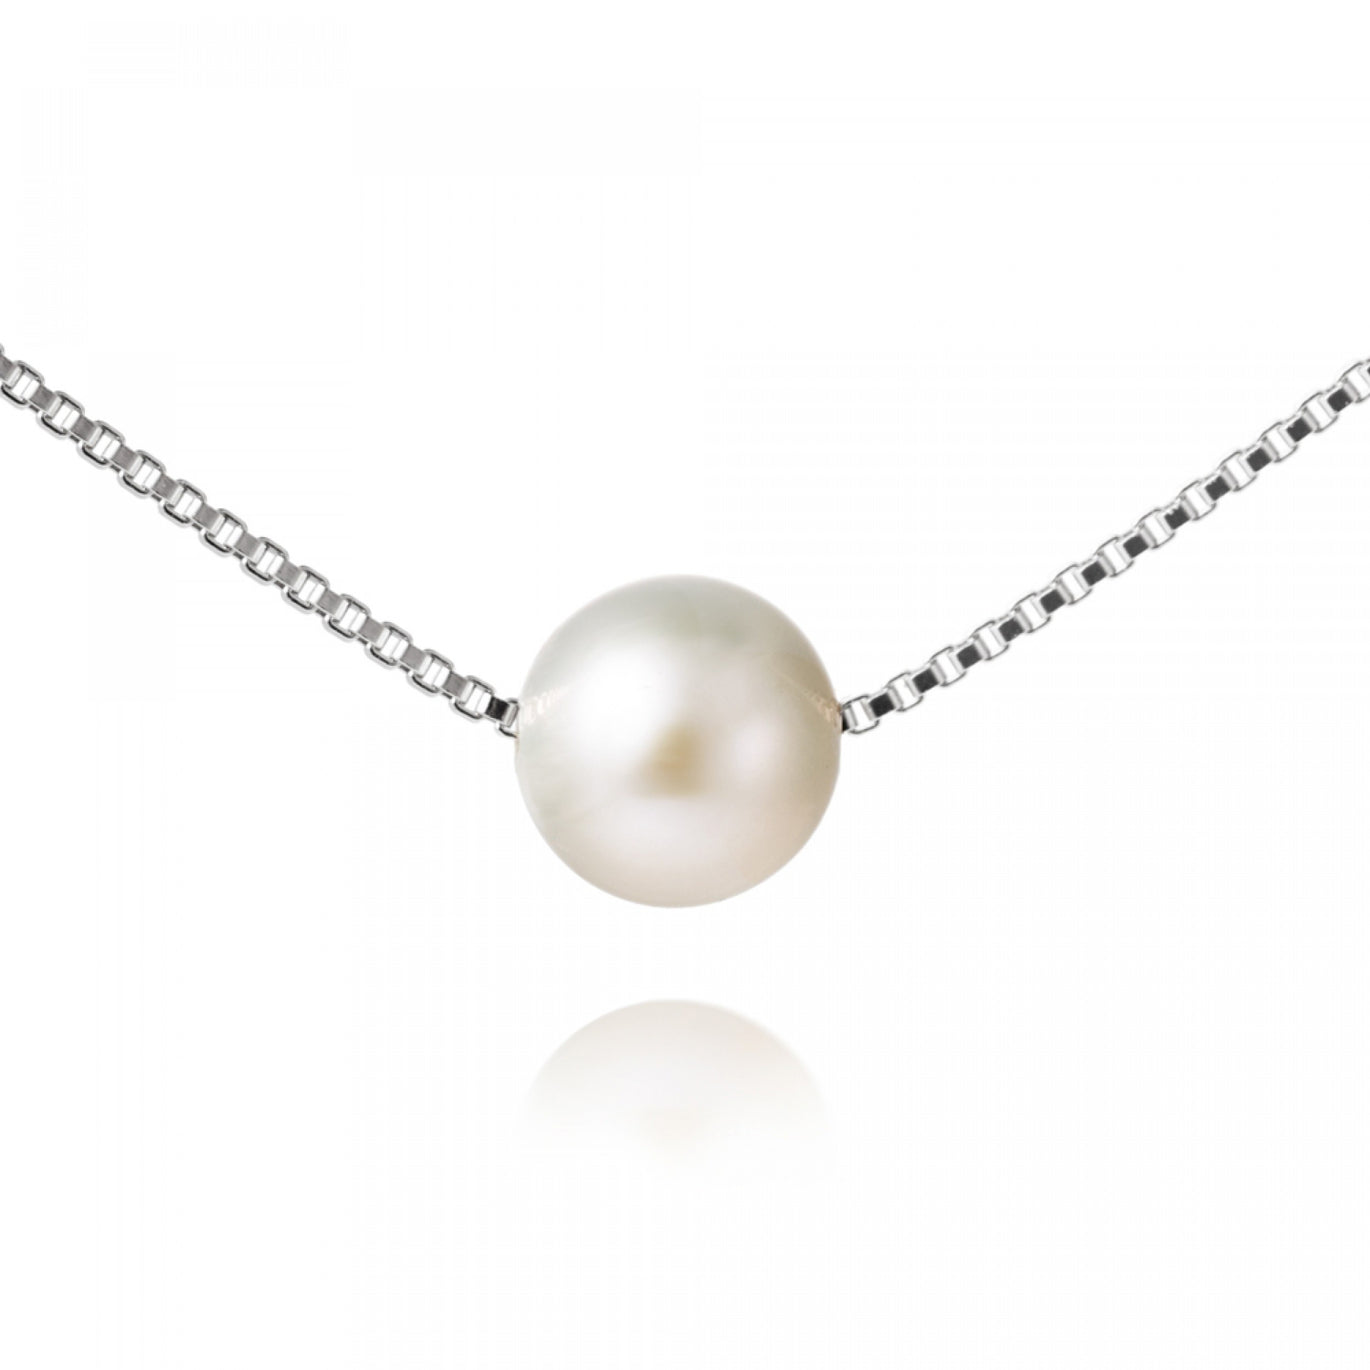 Jersey Pearl Single Pearl Necklace